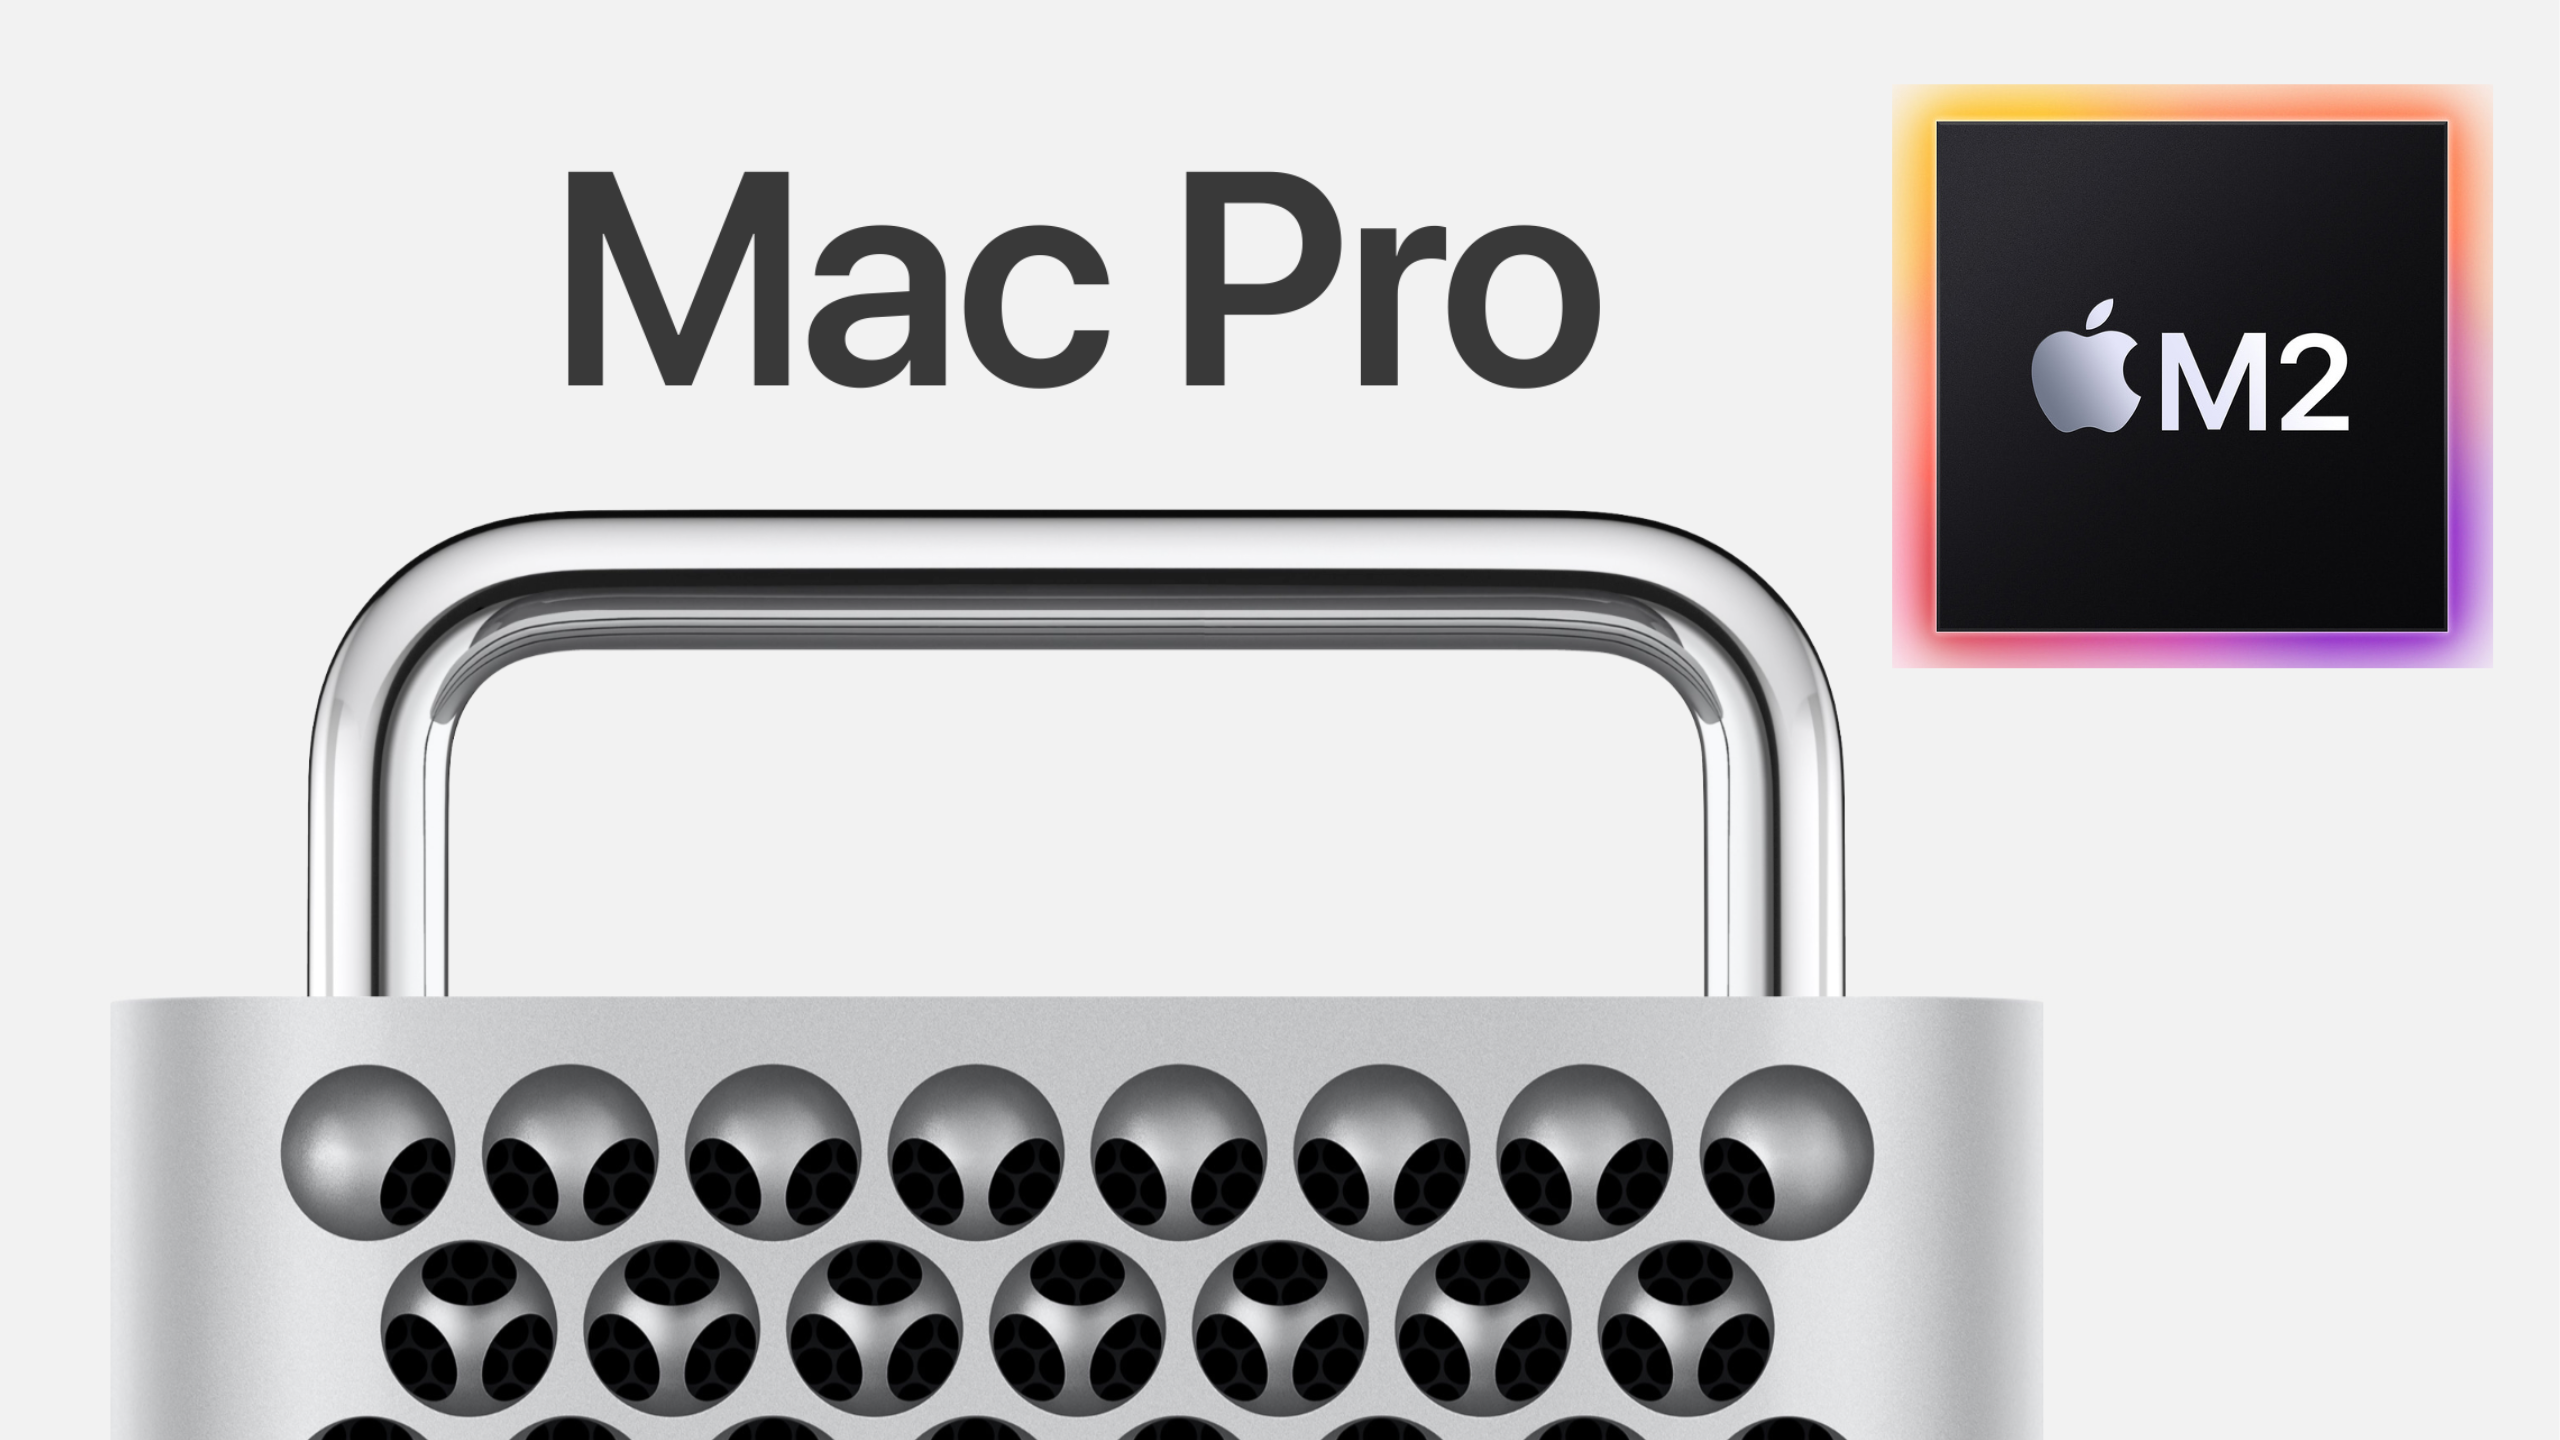 Apple is reportedly abandoning plans for a high-end &quot;Extreme&quot; Mac Pro